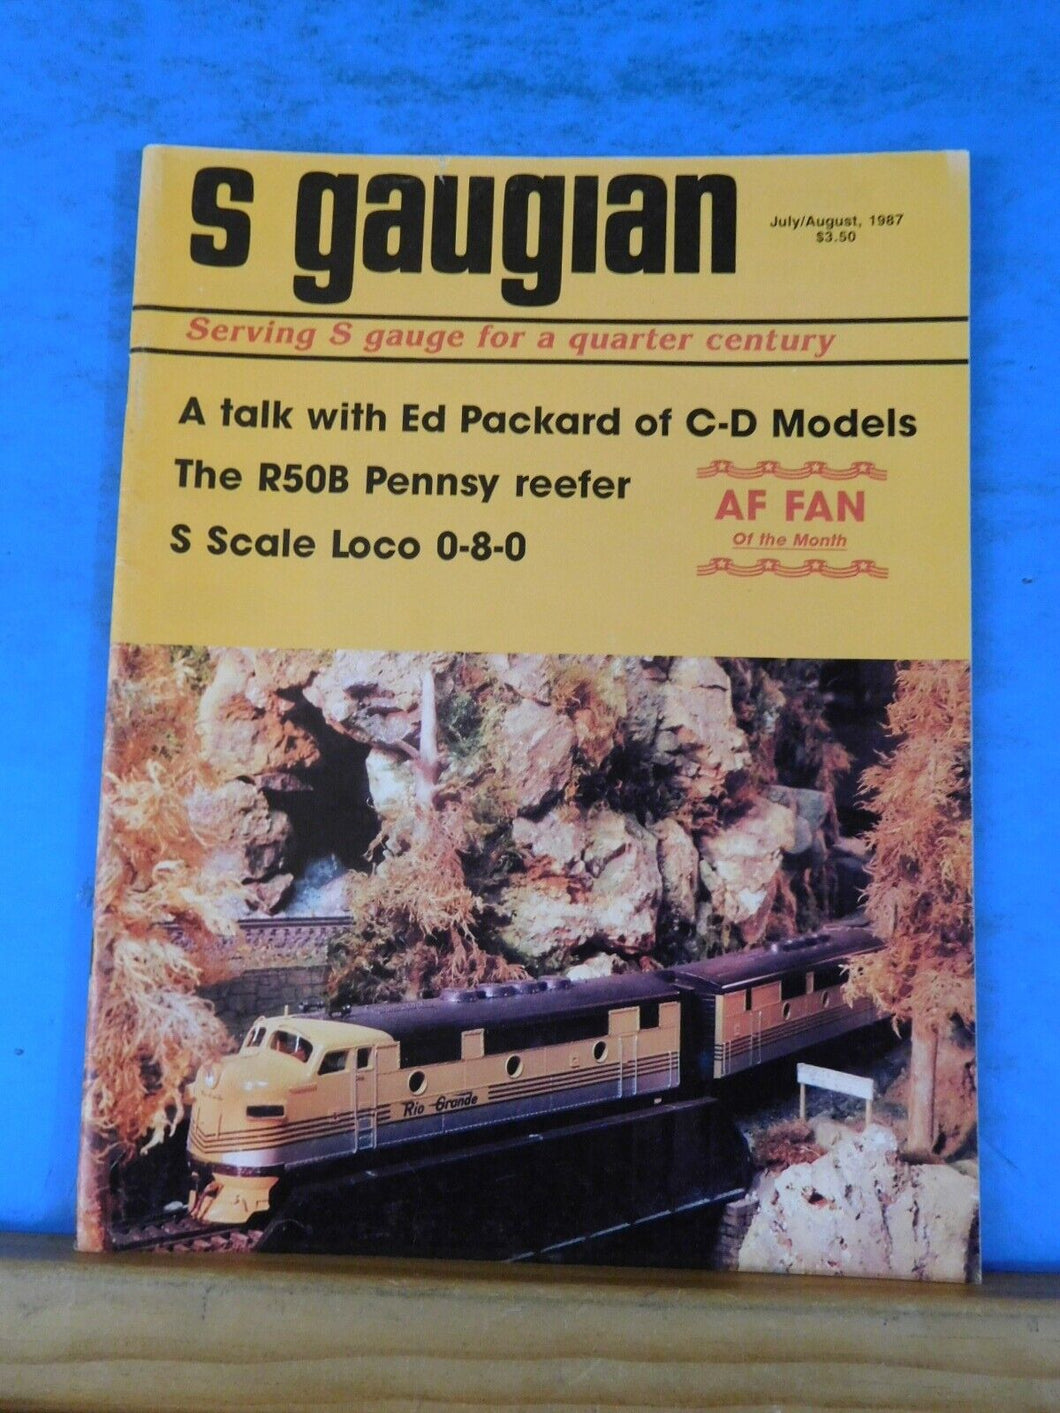 S Gaugian 1987 July Aug A Talk with Ed Packard of C-D Models R50B Pennsy reefer